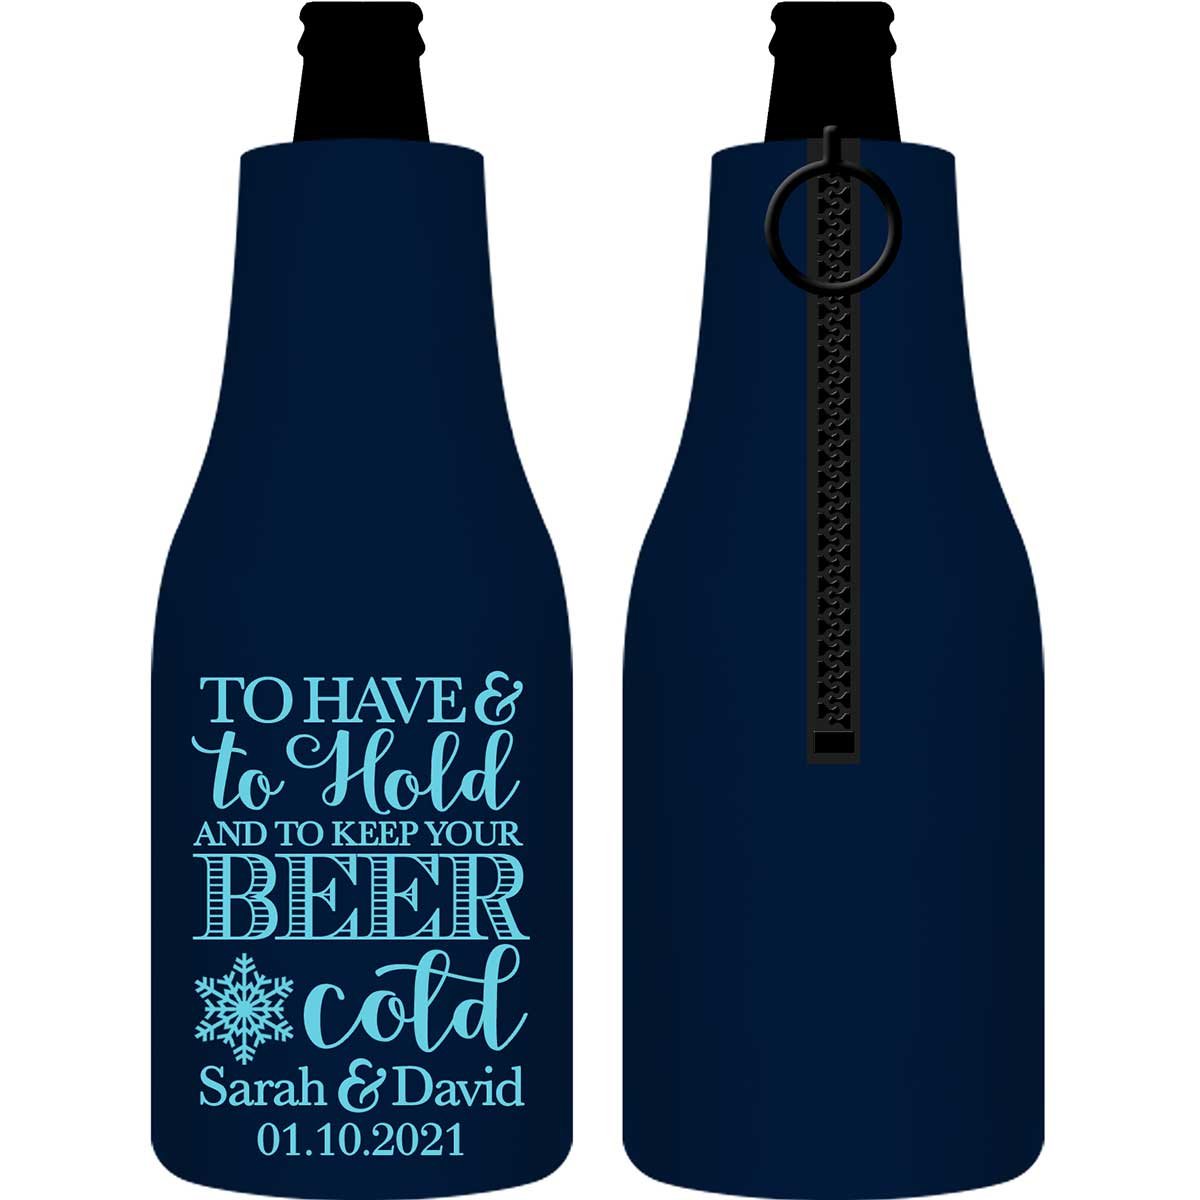 https://www.thatweddingshop.com/wp-content/uploads/2020/01/To-Have-And-To-Hold-Keep-Your-Beer-Cold-1D-Collapsible-Foam-Zippered-Bottle-Koozies-Personalized-Wedding-Favors.jpg